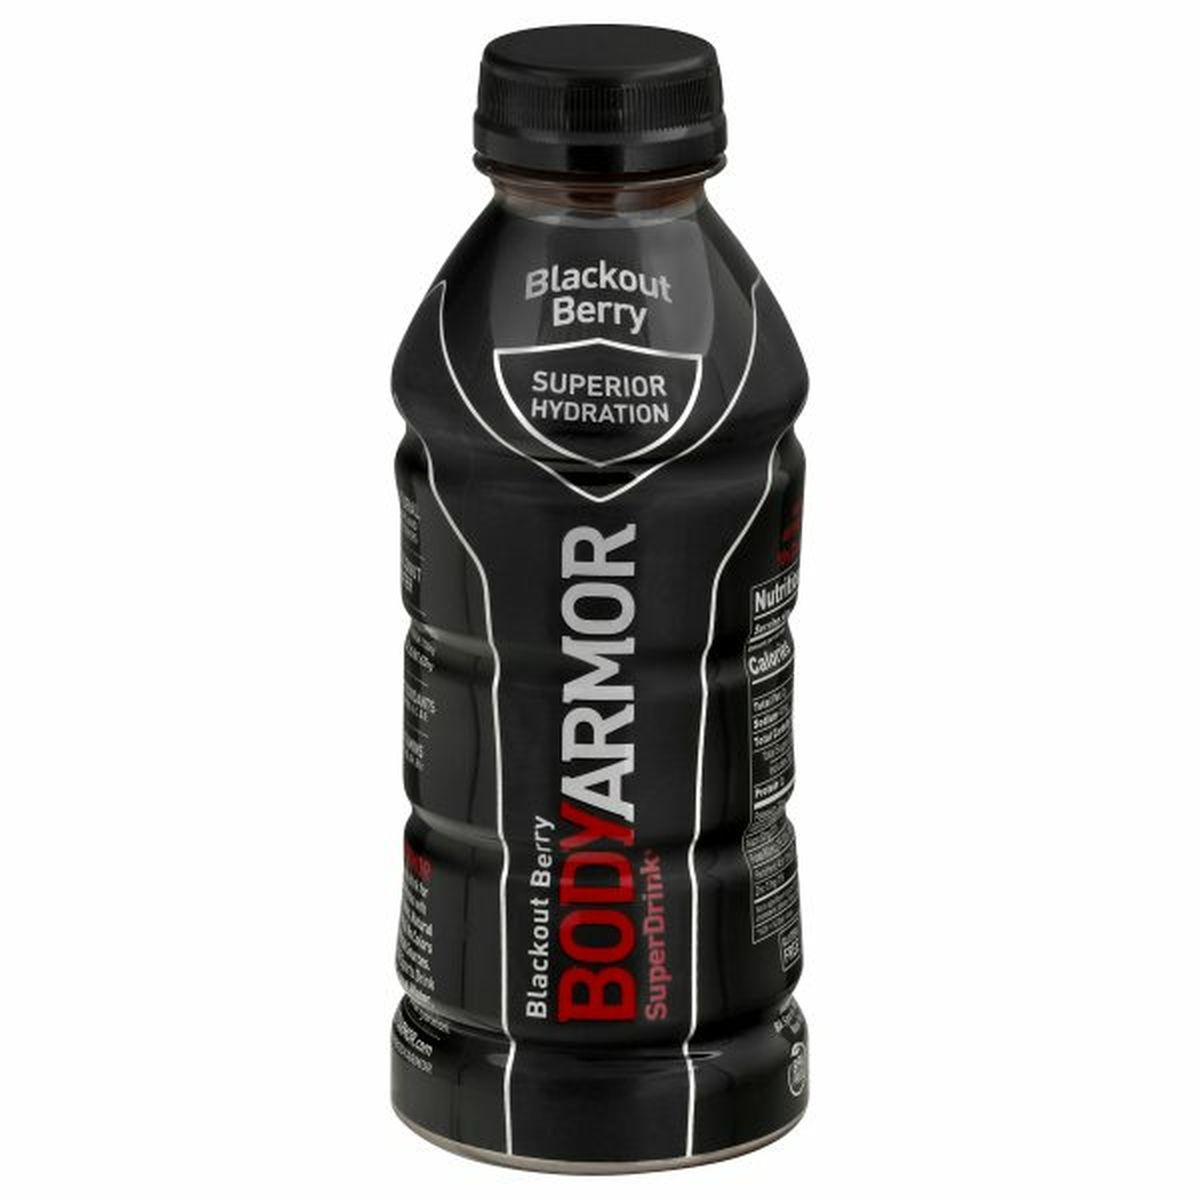 Calories in BODYARMOR Super Drink, Blackout Berry